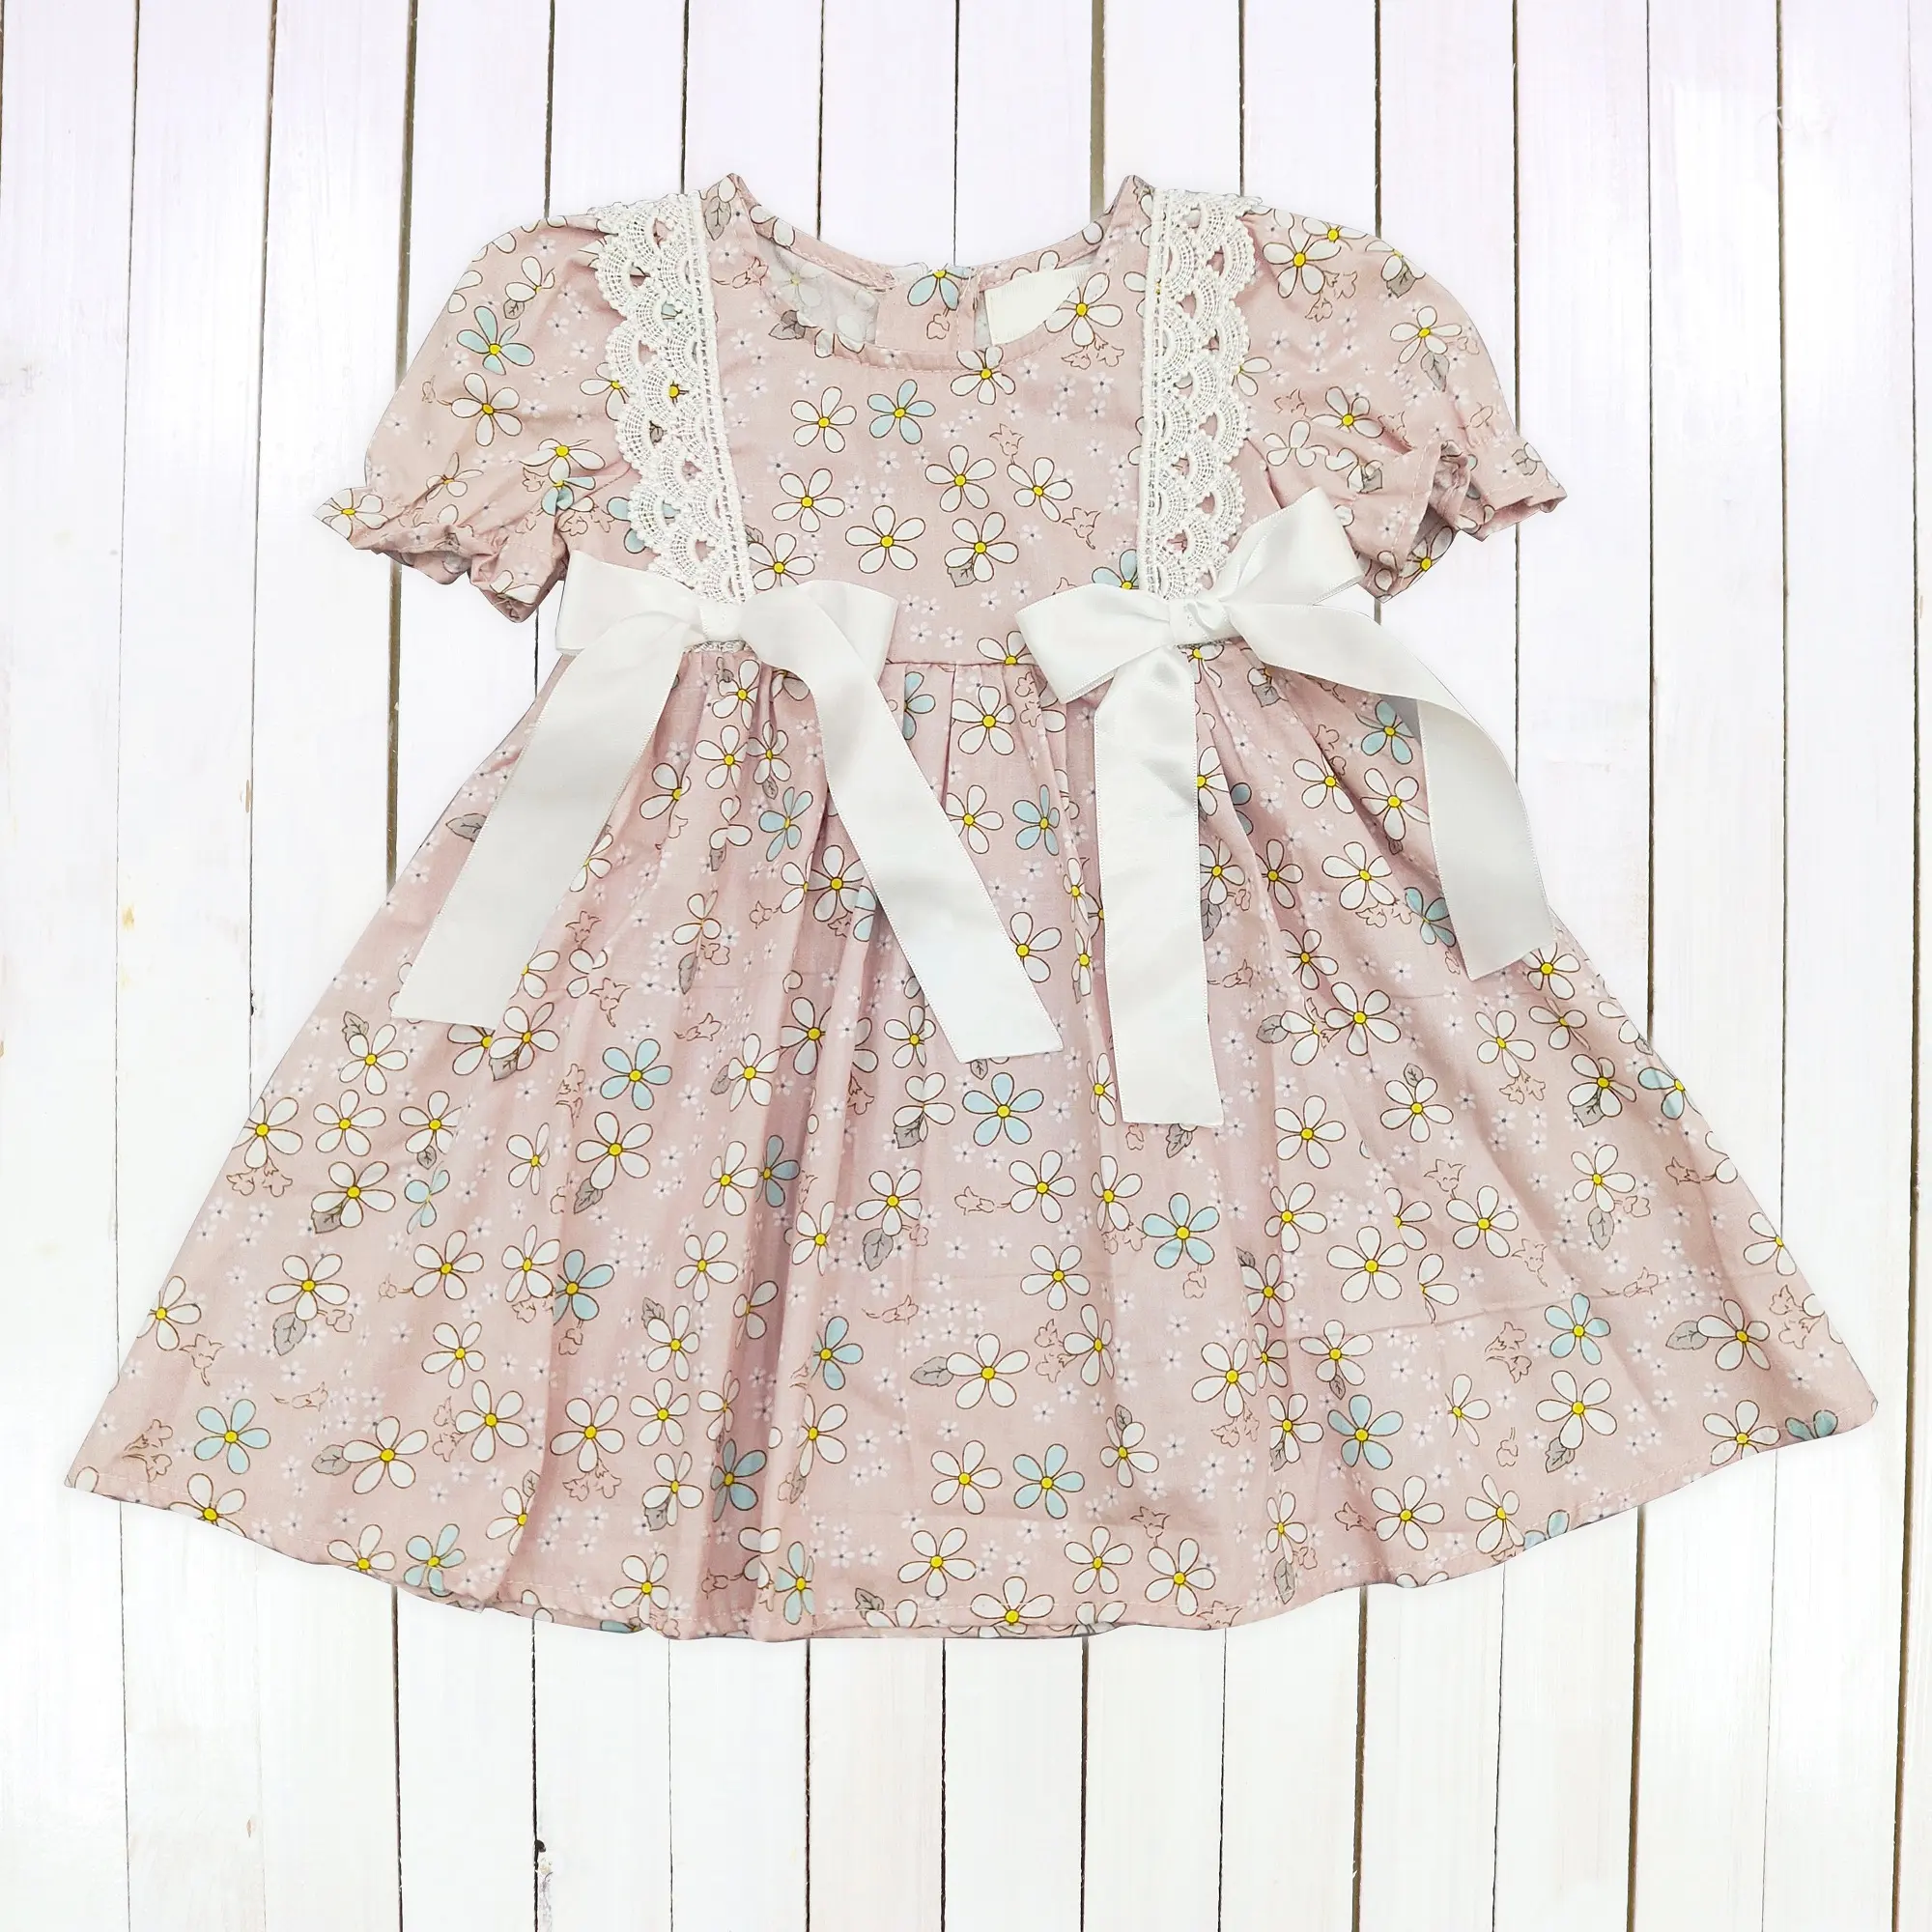 Waist ribbons style kid children clothing dress floral pattern fashionable with lace toddler girls dresses clothes for baby